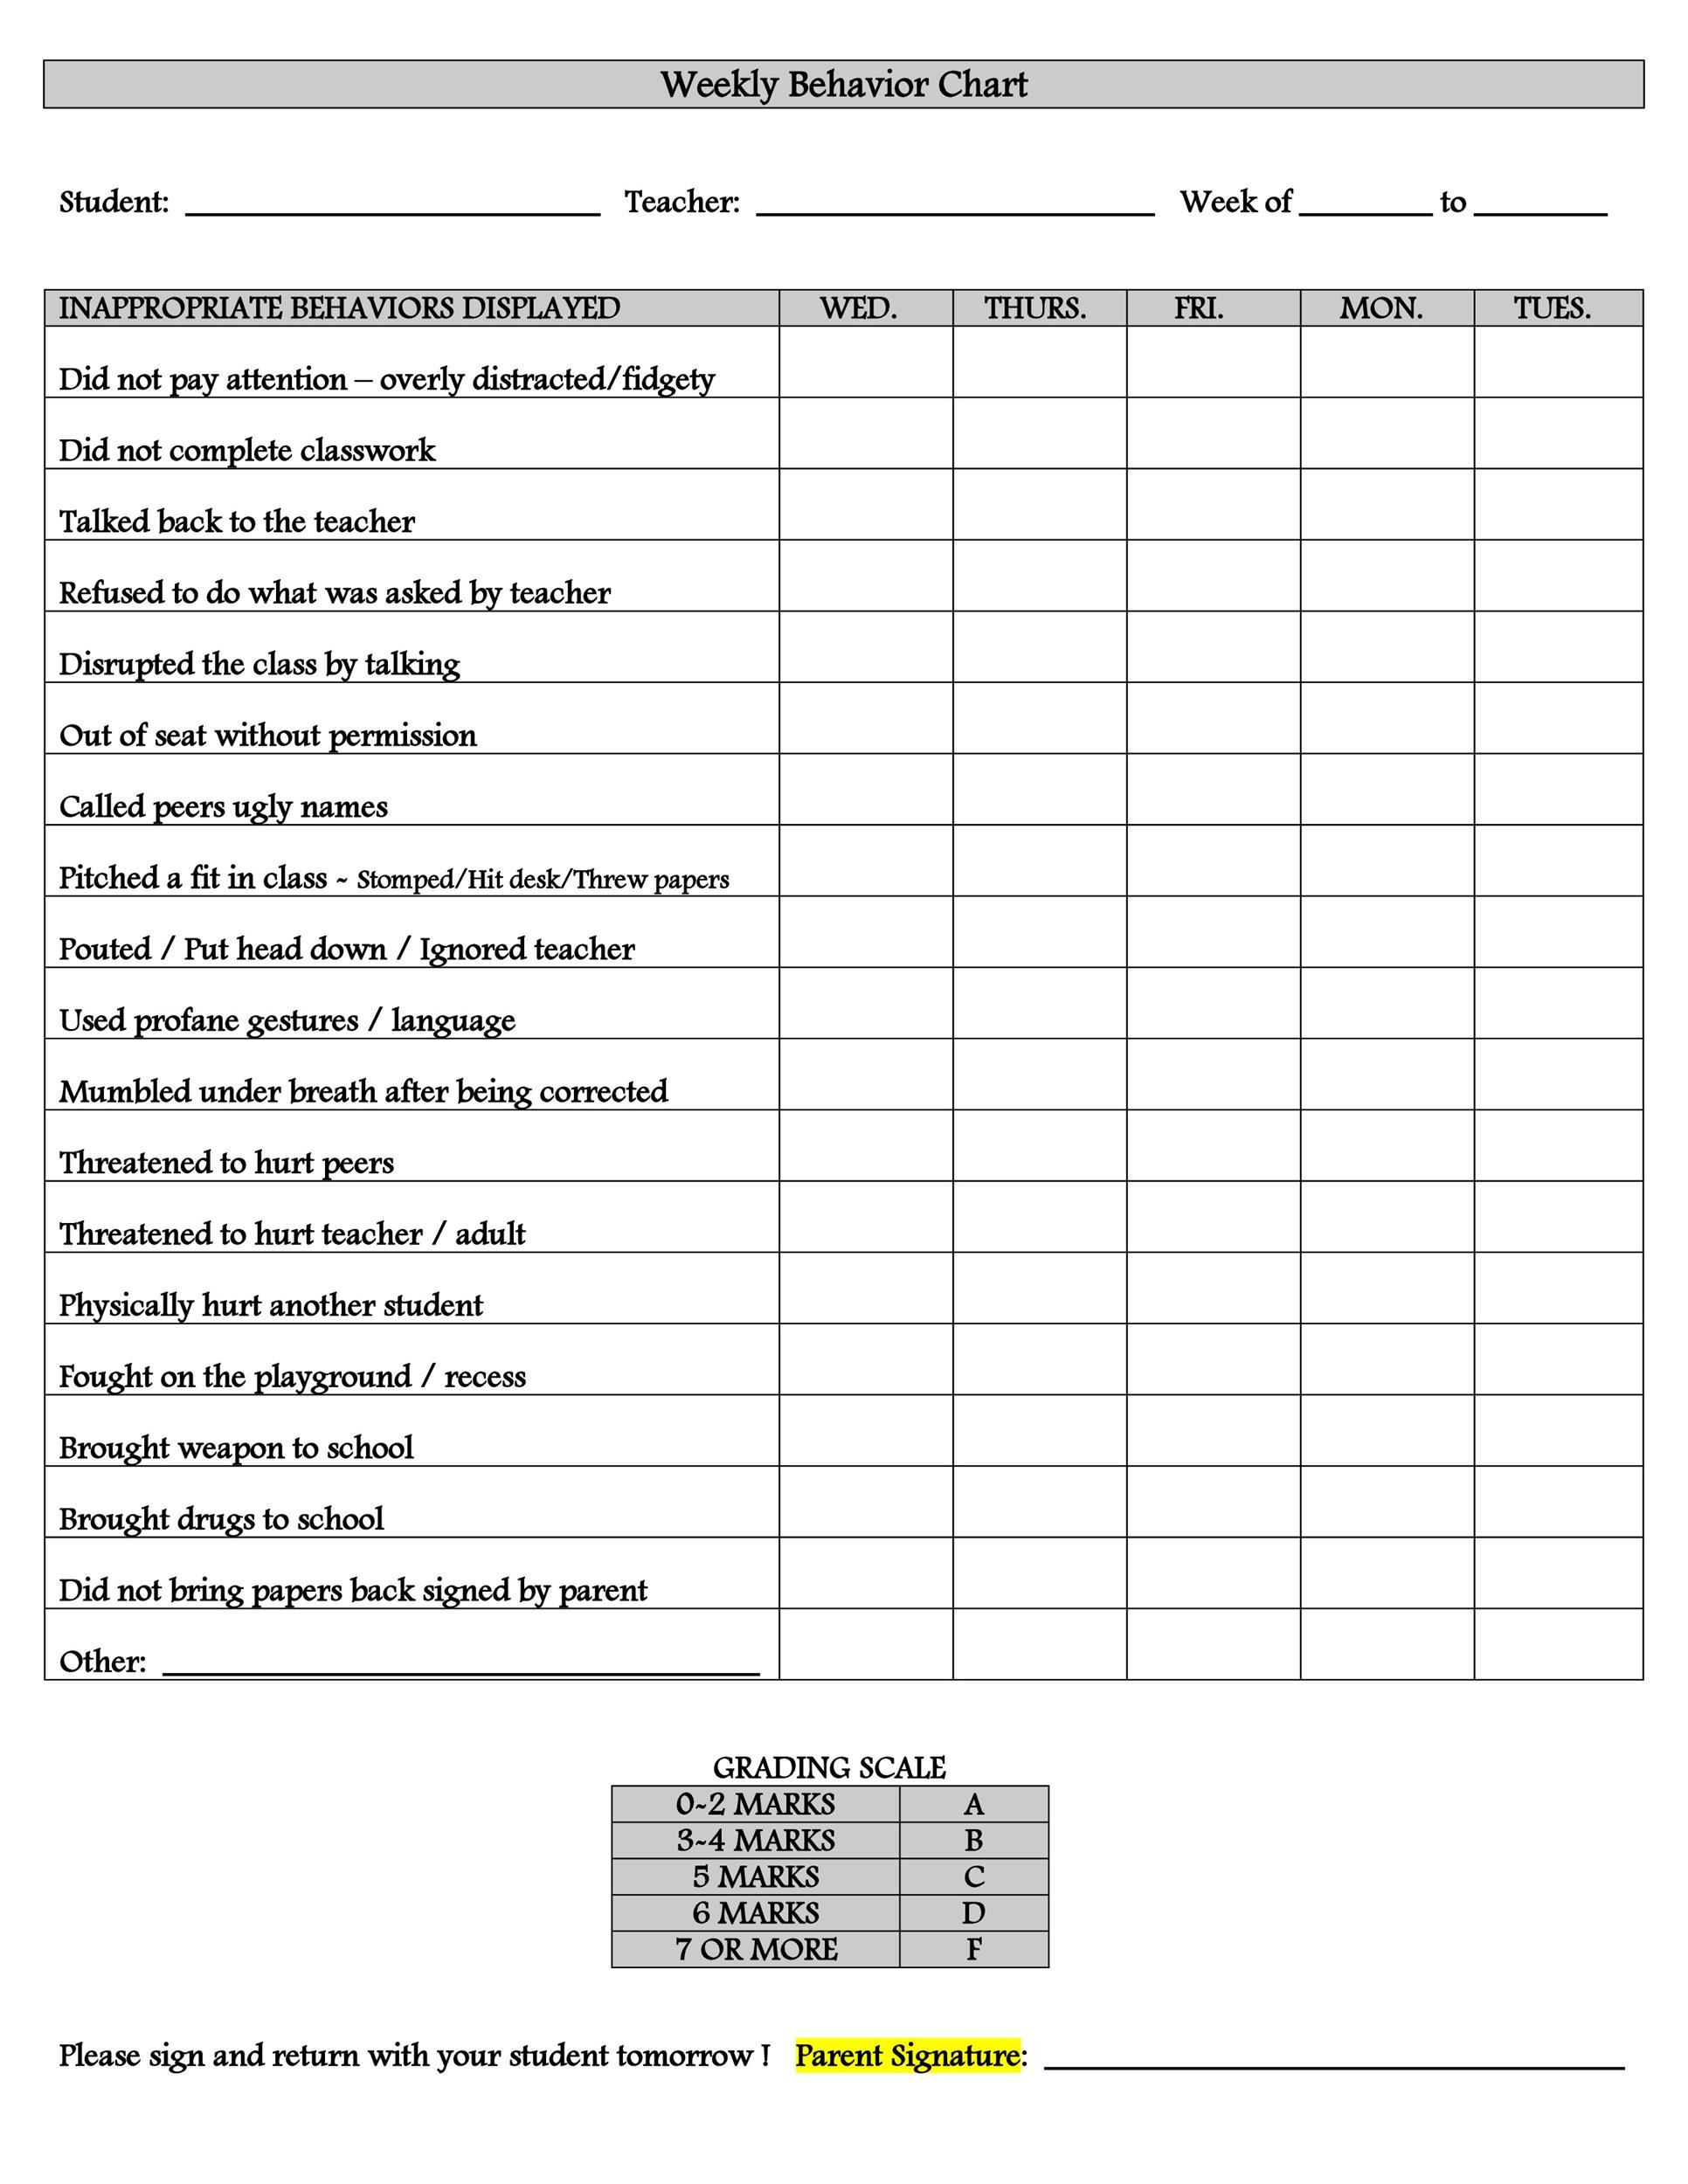 Free Printable Daily Behavior Charts For Elementary Students